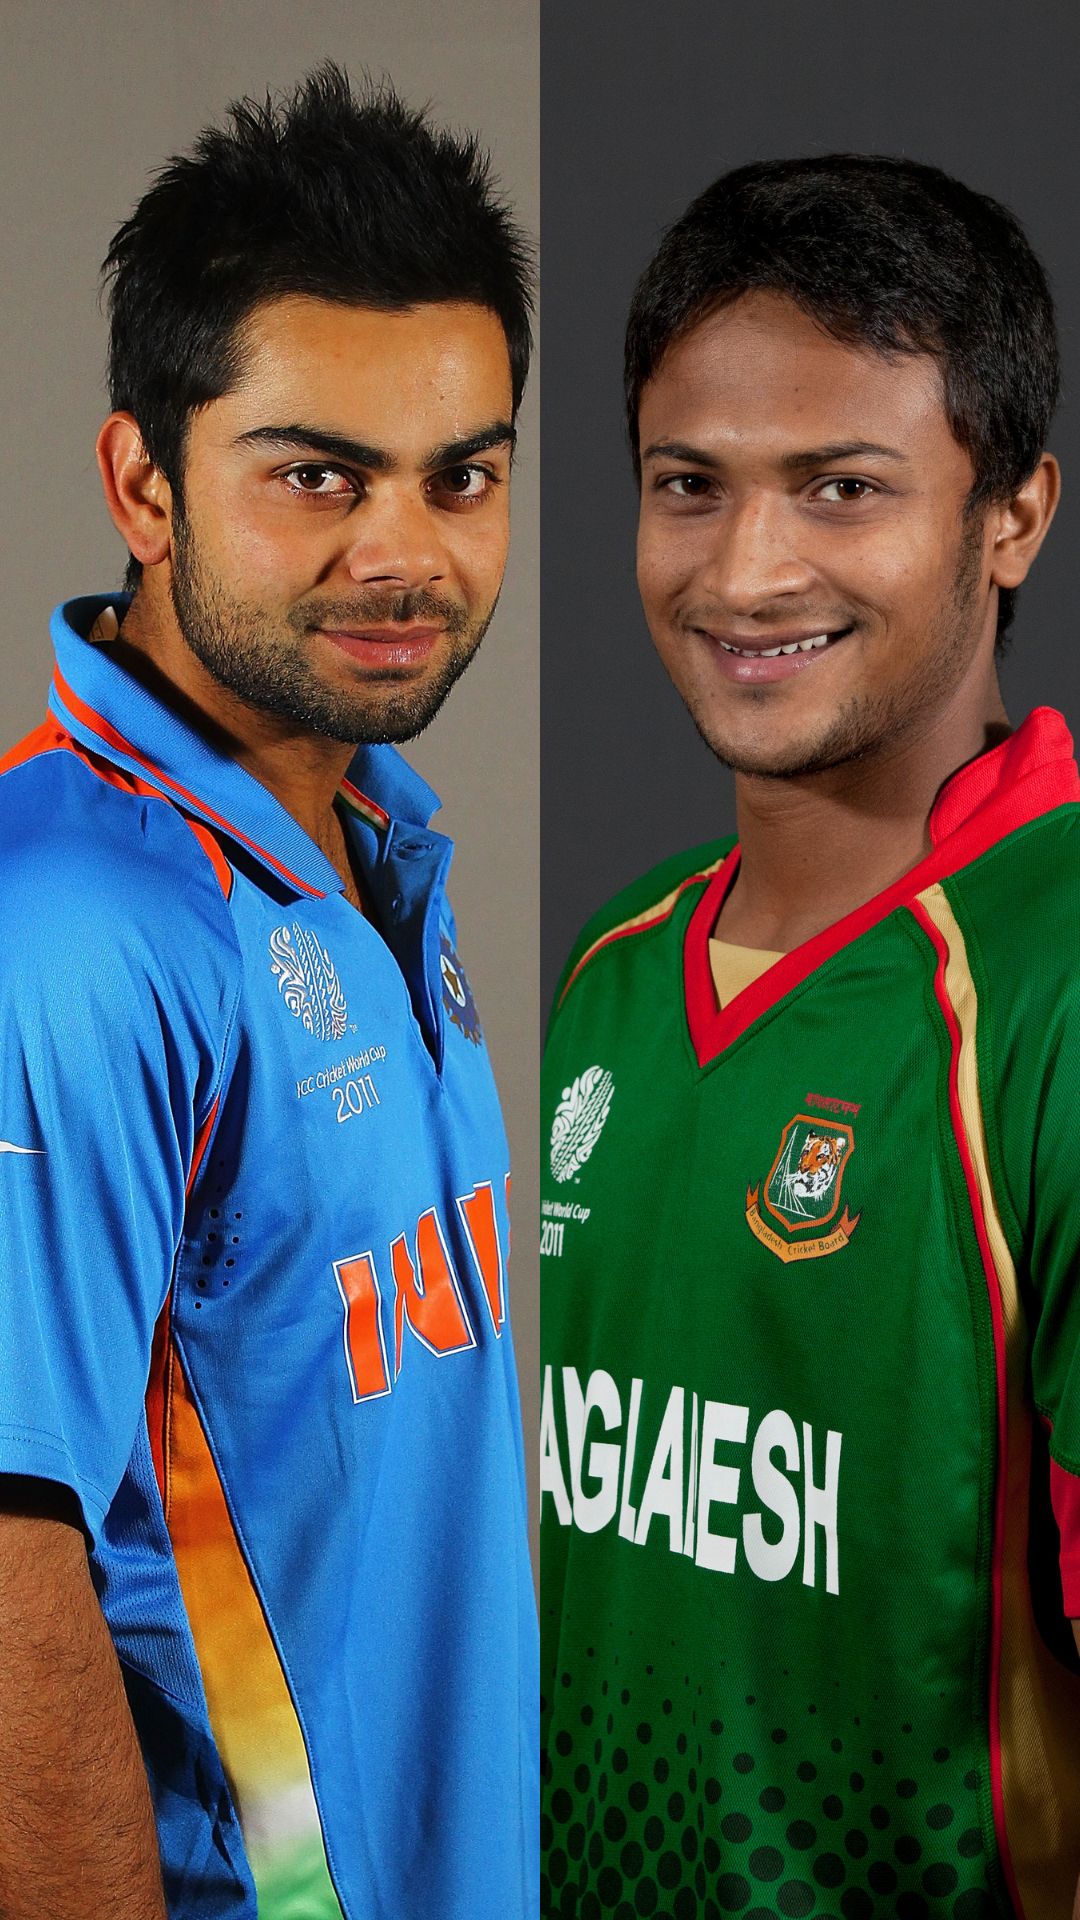 Players to score most fifties in ODI World Cup; Shakib pips Virat to claim second spot
